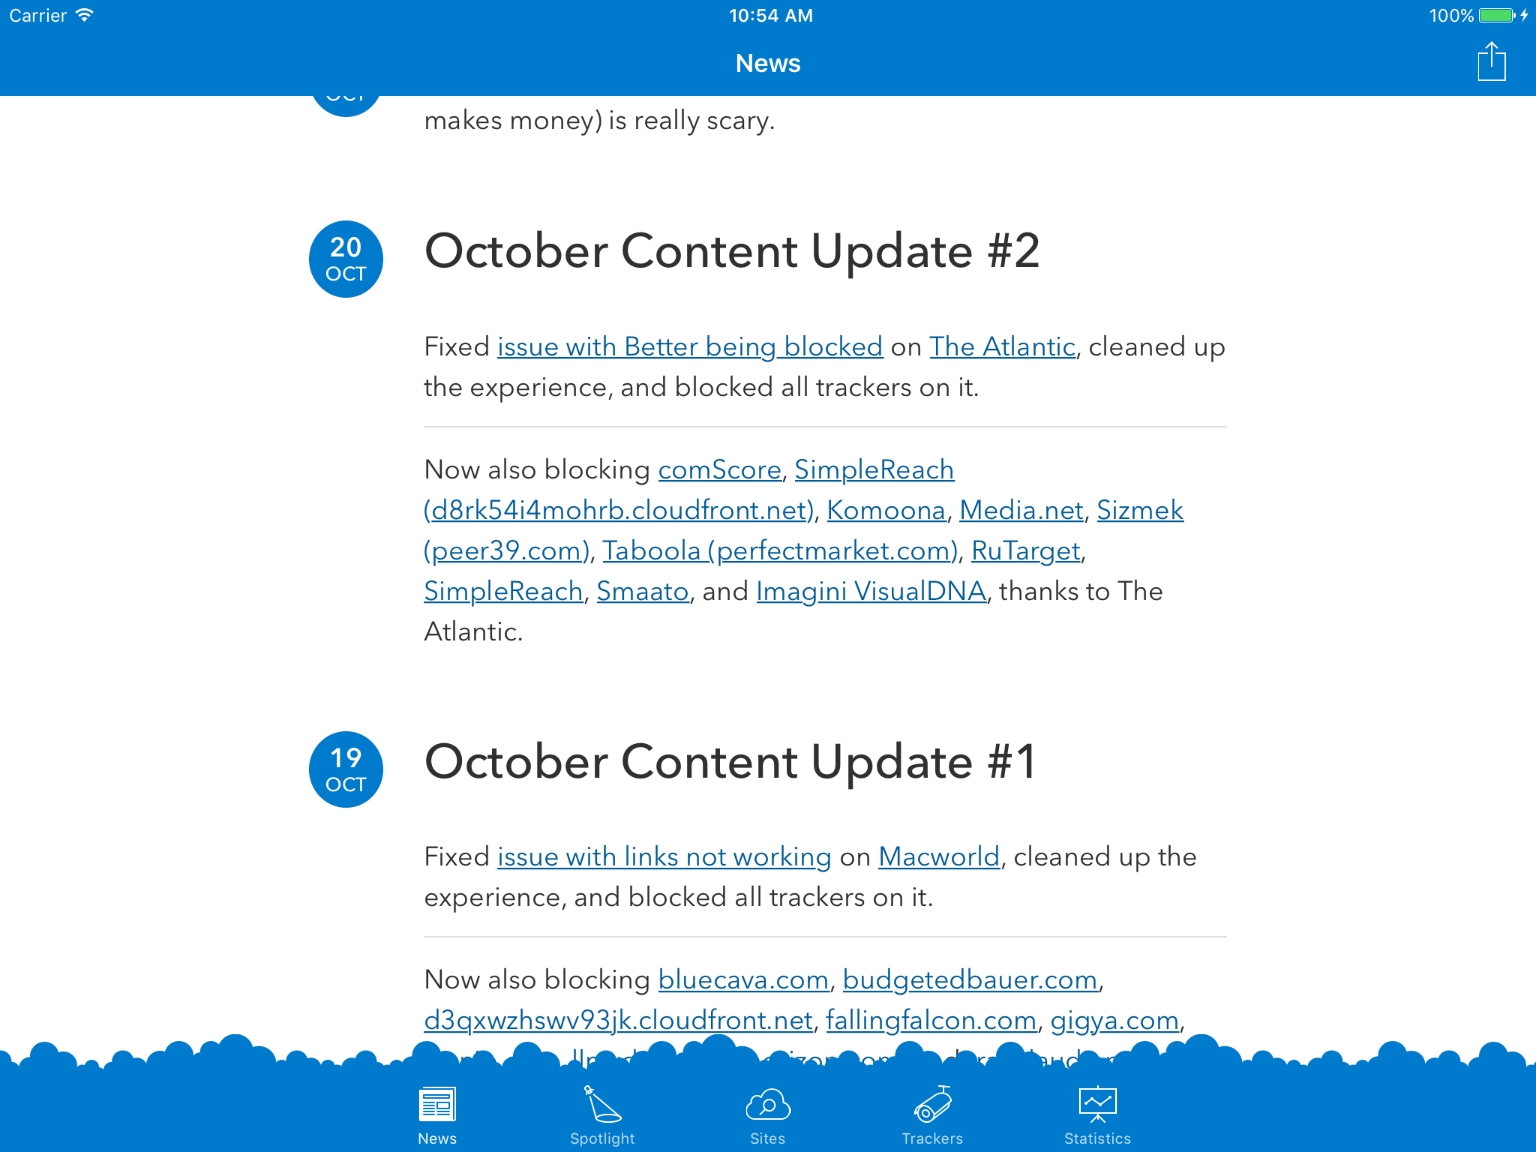 Screenshot of the new News layout on the iPad Air 2